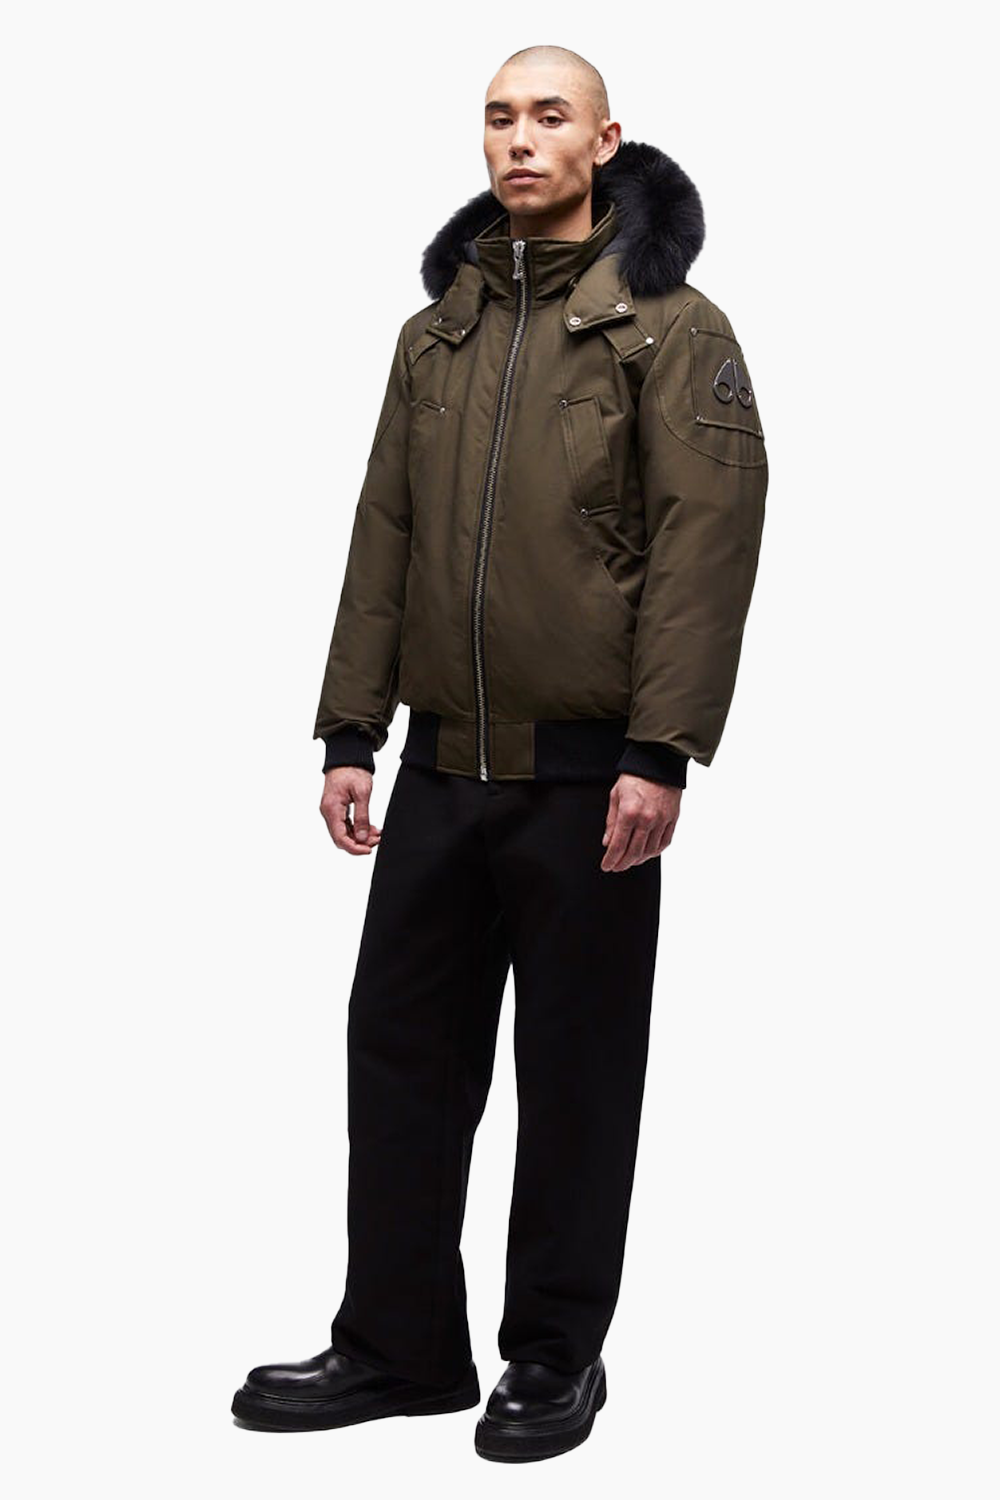 Moose Knuckles Men's Ballistic Bomber in Army with Black Fur